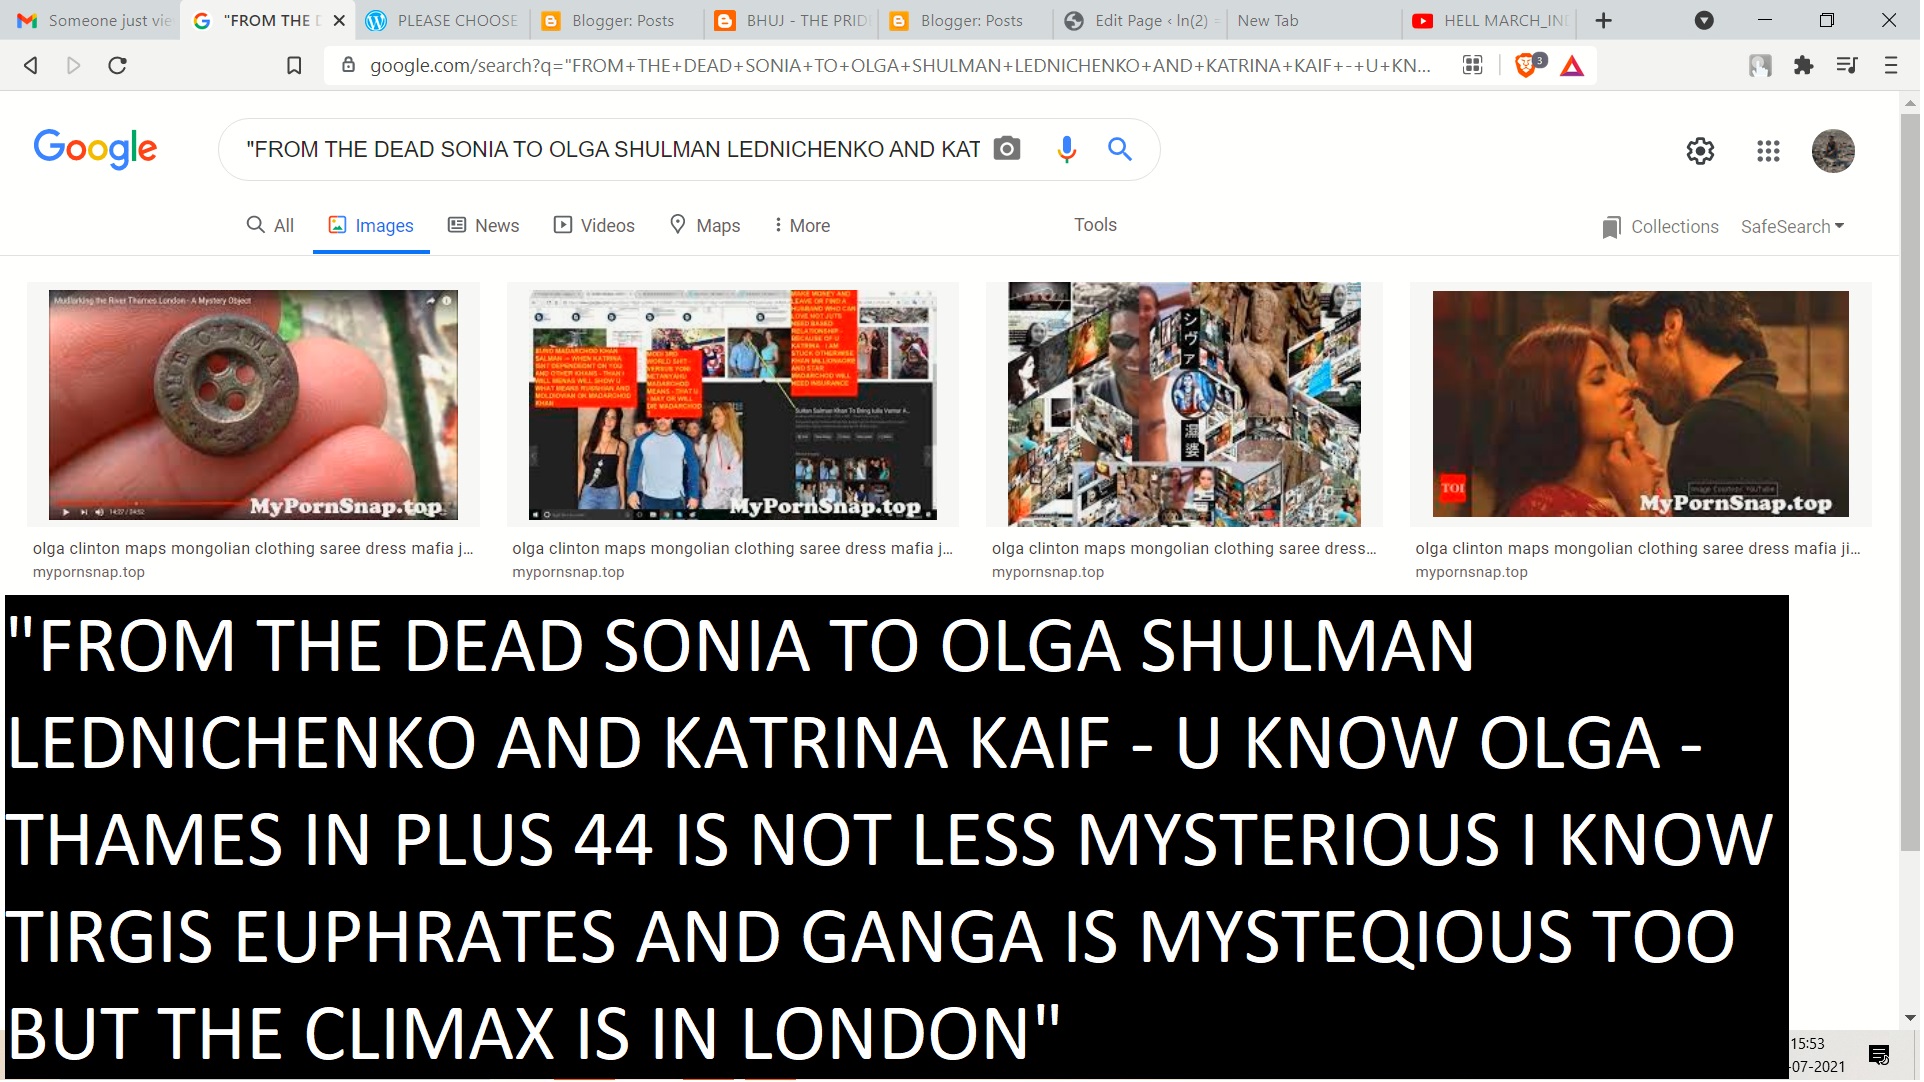 FROM THE DEAD SONIA TO OLGA SHULMAN LEDNICHENKO AND KATRINA KAIF - U KNOW OLGA - THAMES IN PLUS 44 IS NOT LESS MYSTERIOUS I KNOW TIRGIS EUPHRATES AND GANGA IS MYSTEQIOUS TOO BUT THE CLIMAX IS IN LONDON